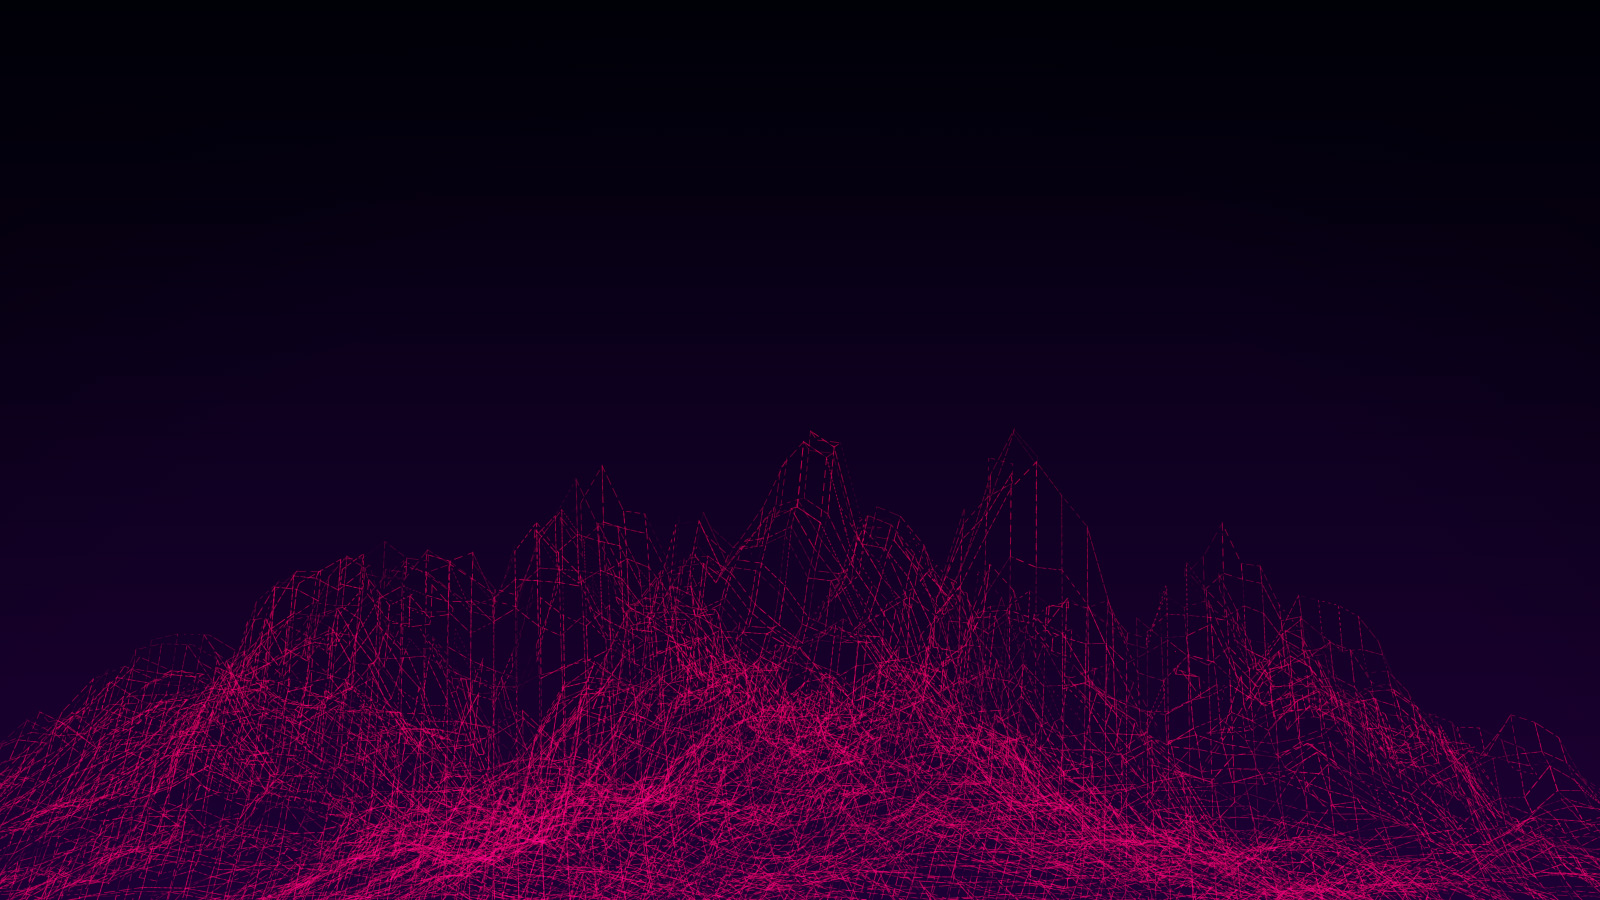 Abstract dark background with pink lines in the shape of a rocky mountain